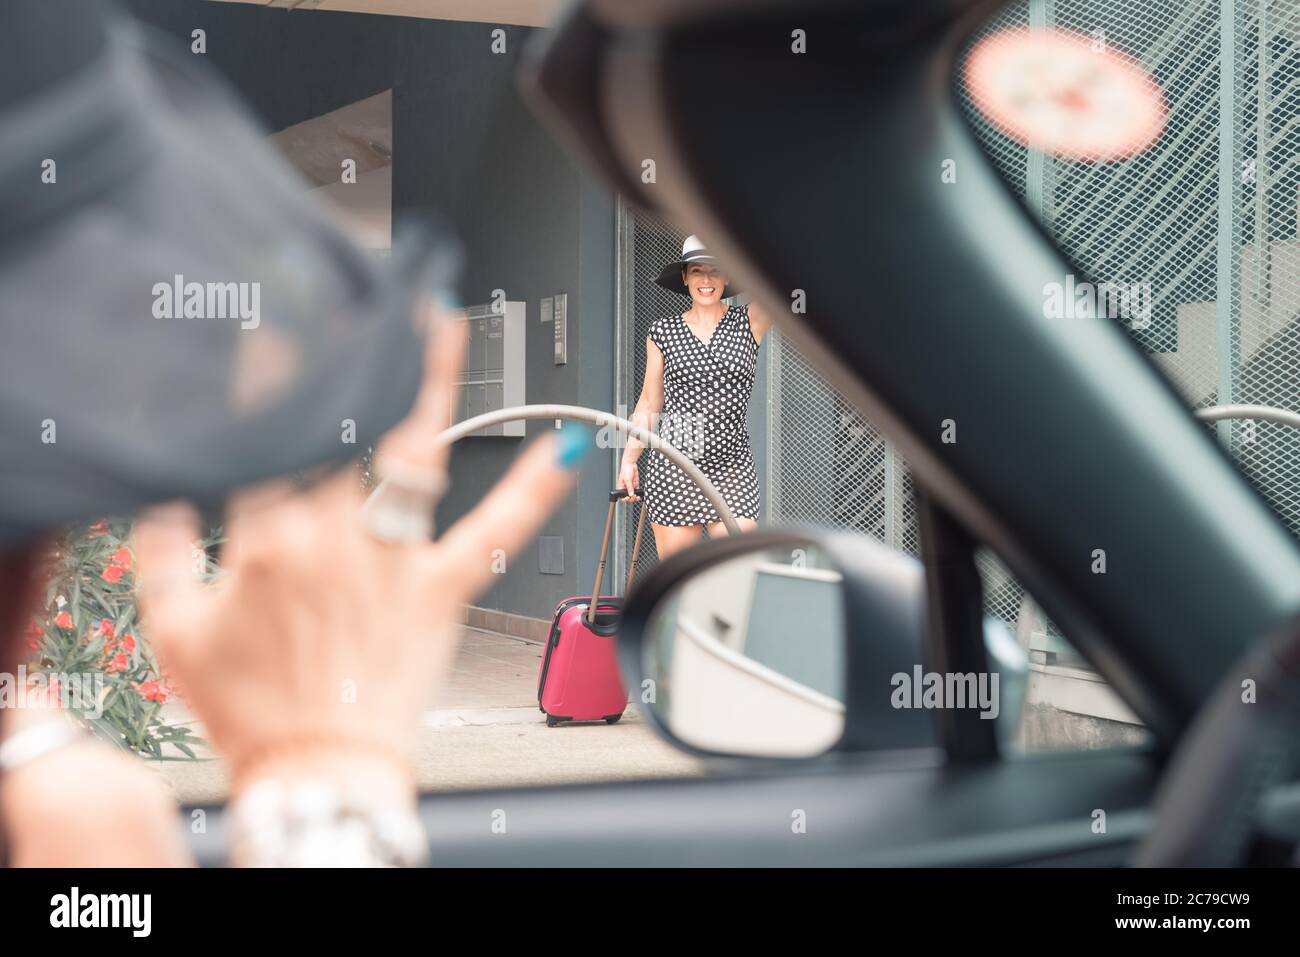 Elegant woman in mini dress with high notches walking towards the car with the suitcase. Stock Photo